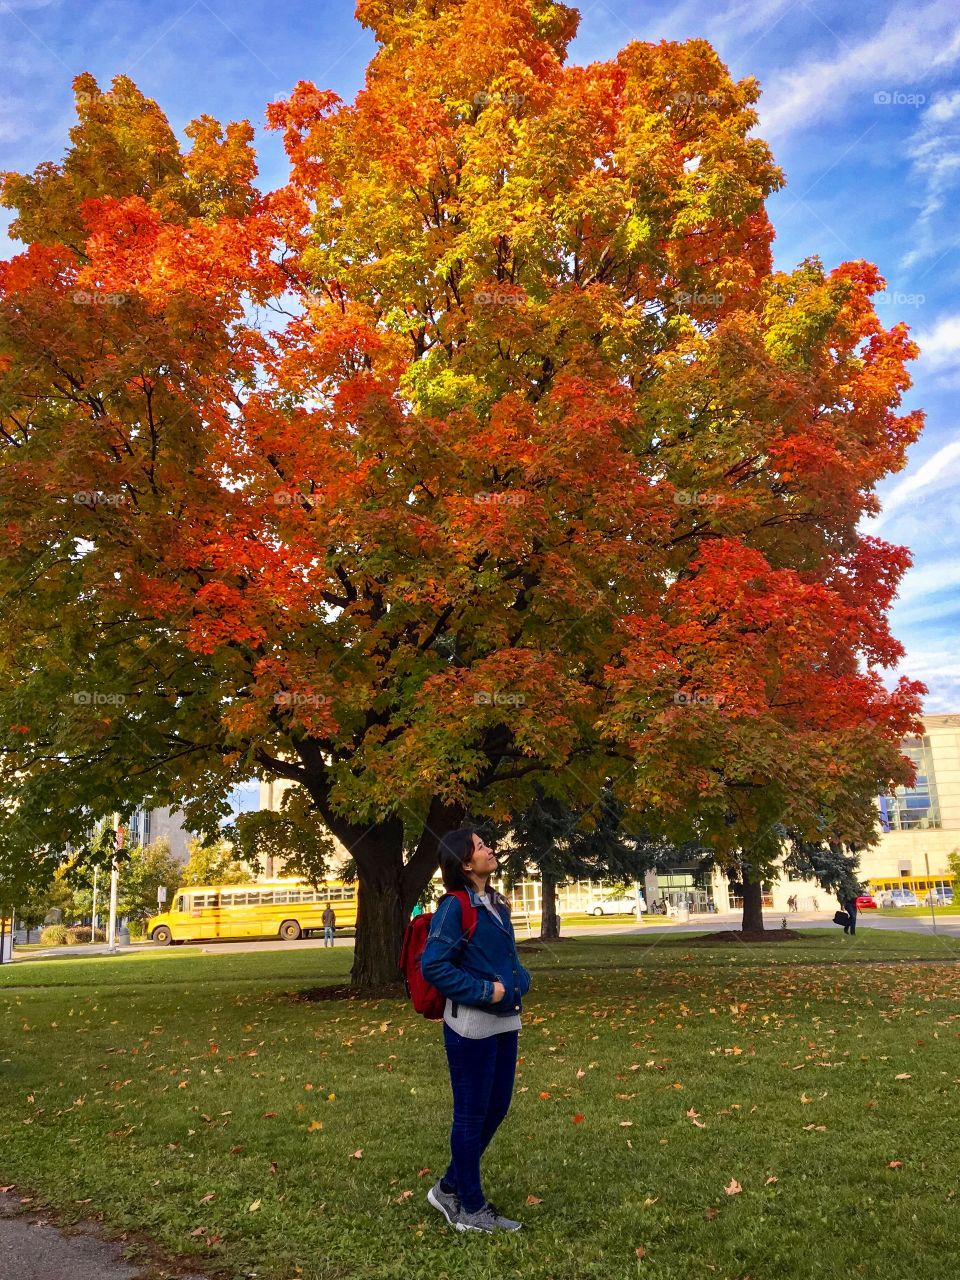 Autumn, colour change and schooling. Autumn is the beginning of new term for school. The sign of colourful leaf makes students enjoying their school life! :)